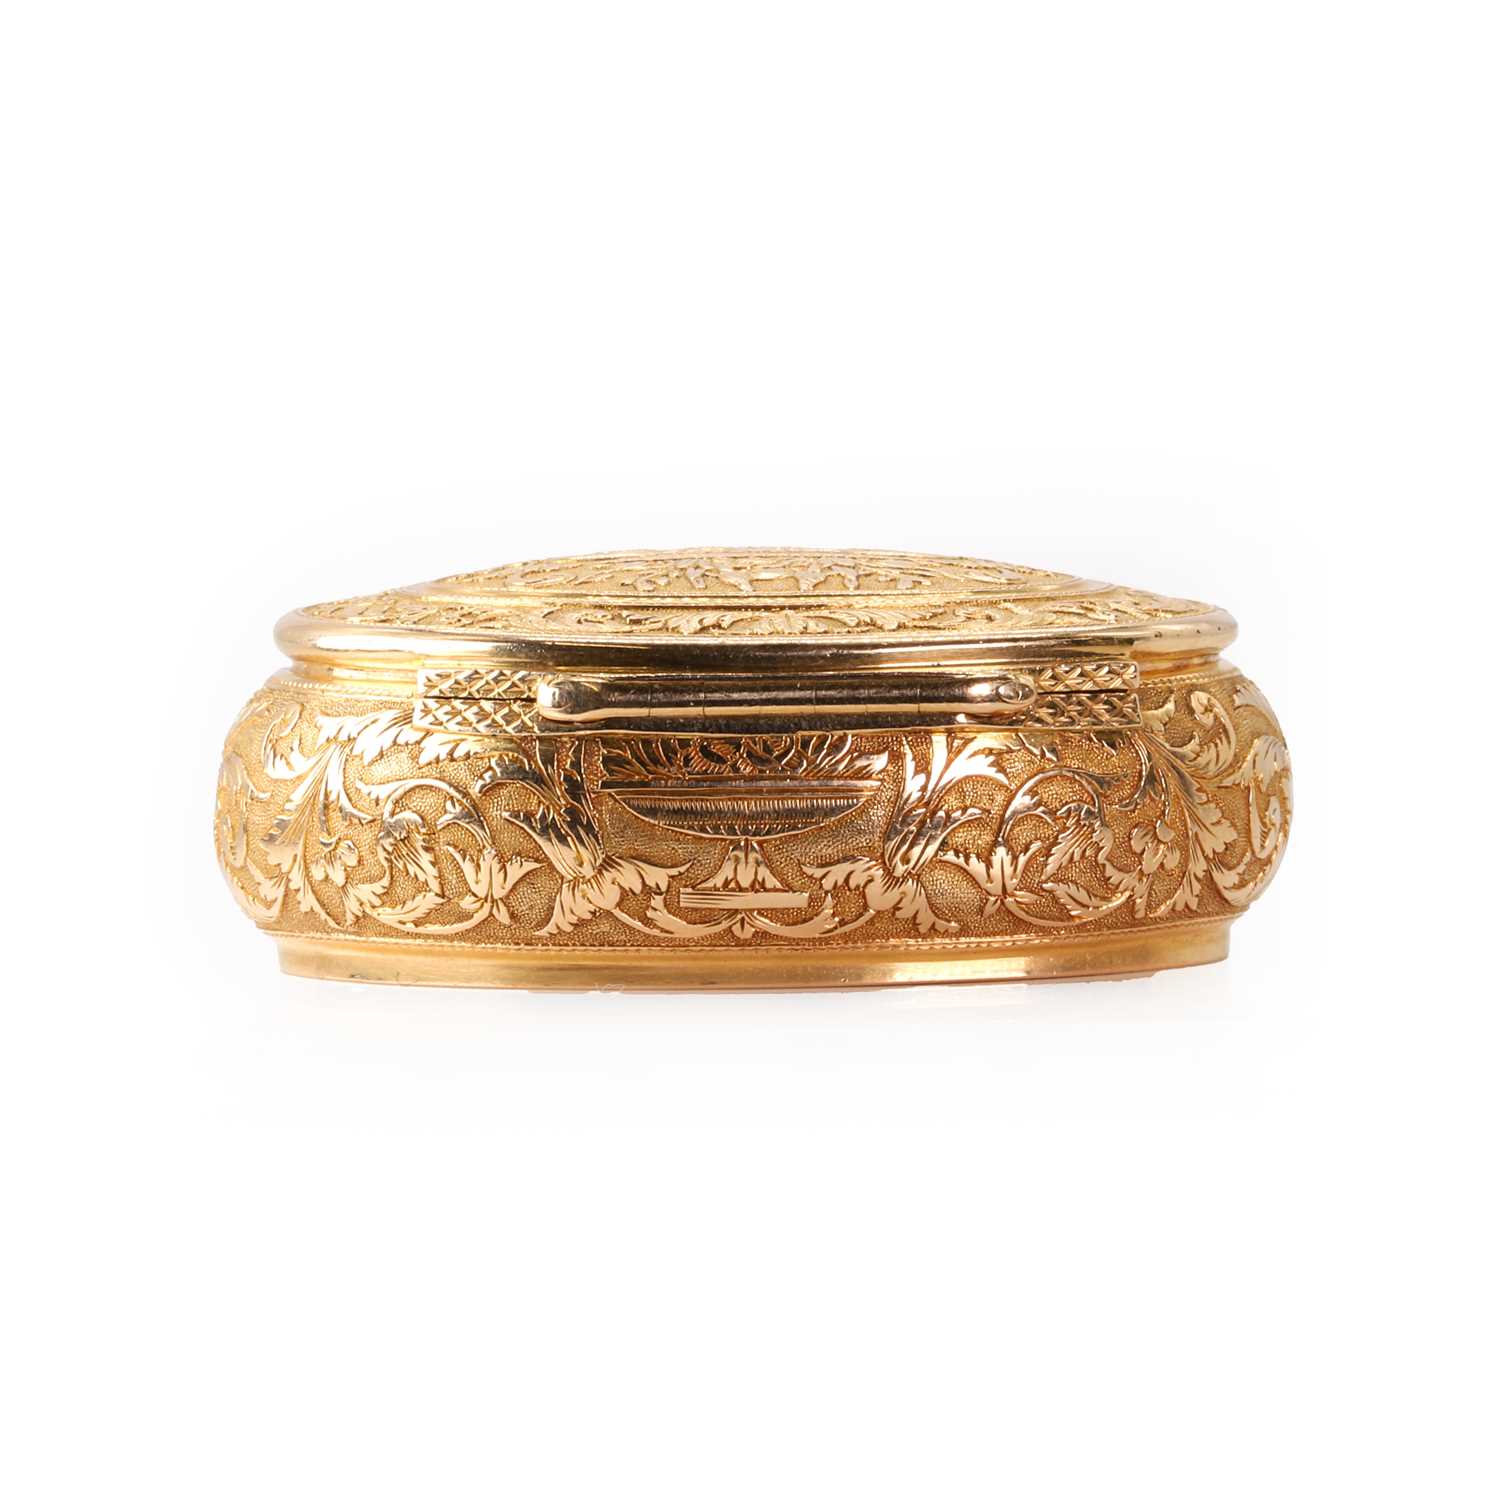 A French gold oval snuffbox, - Image 7 of 7